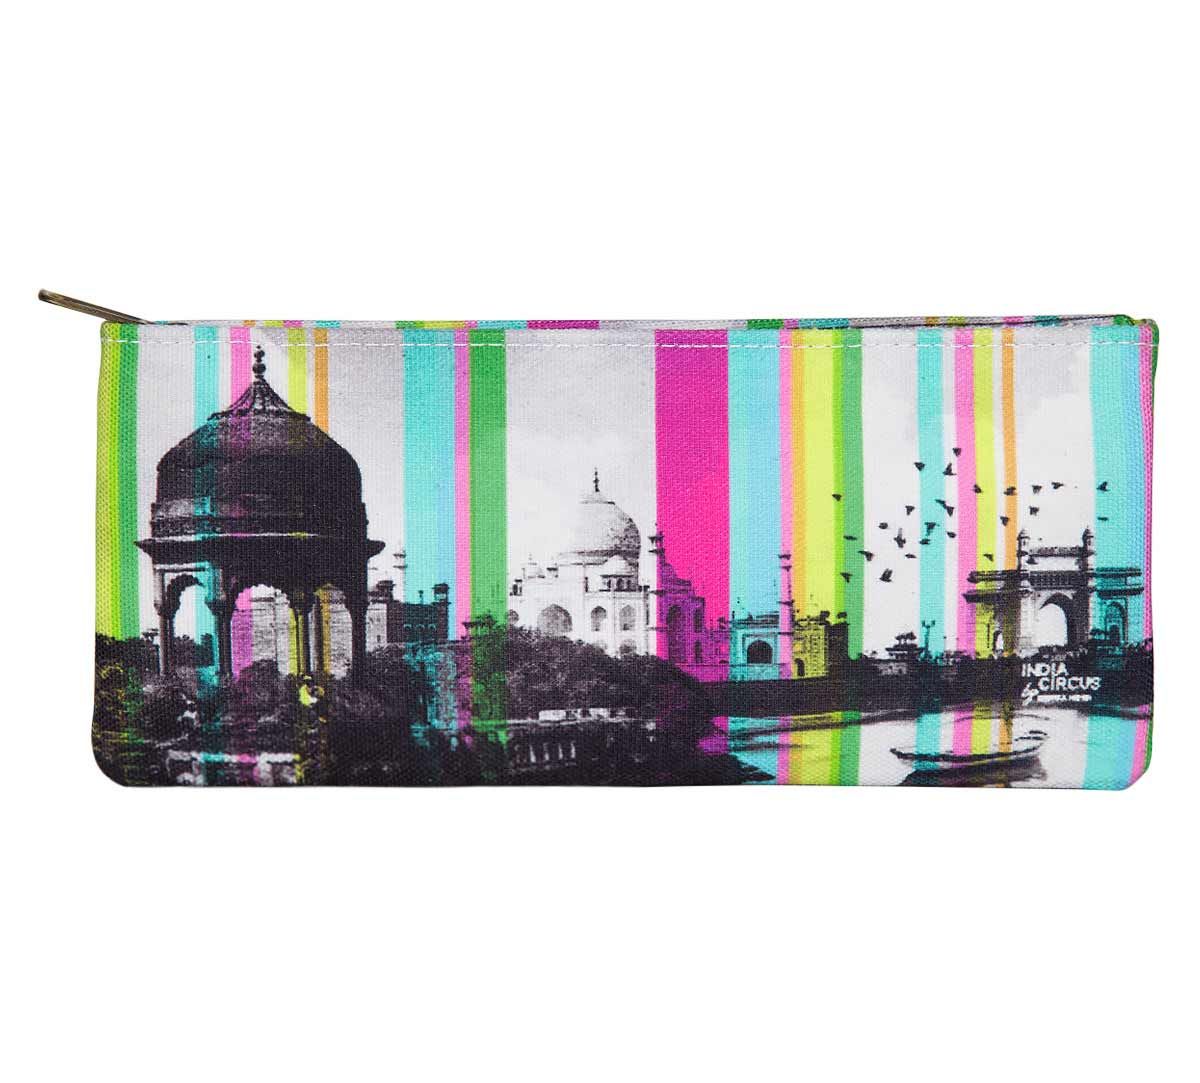 India Circus Strokes of India Small Makeup Pouch